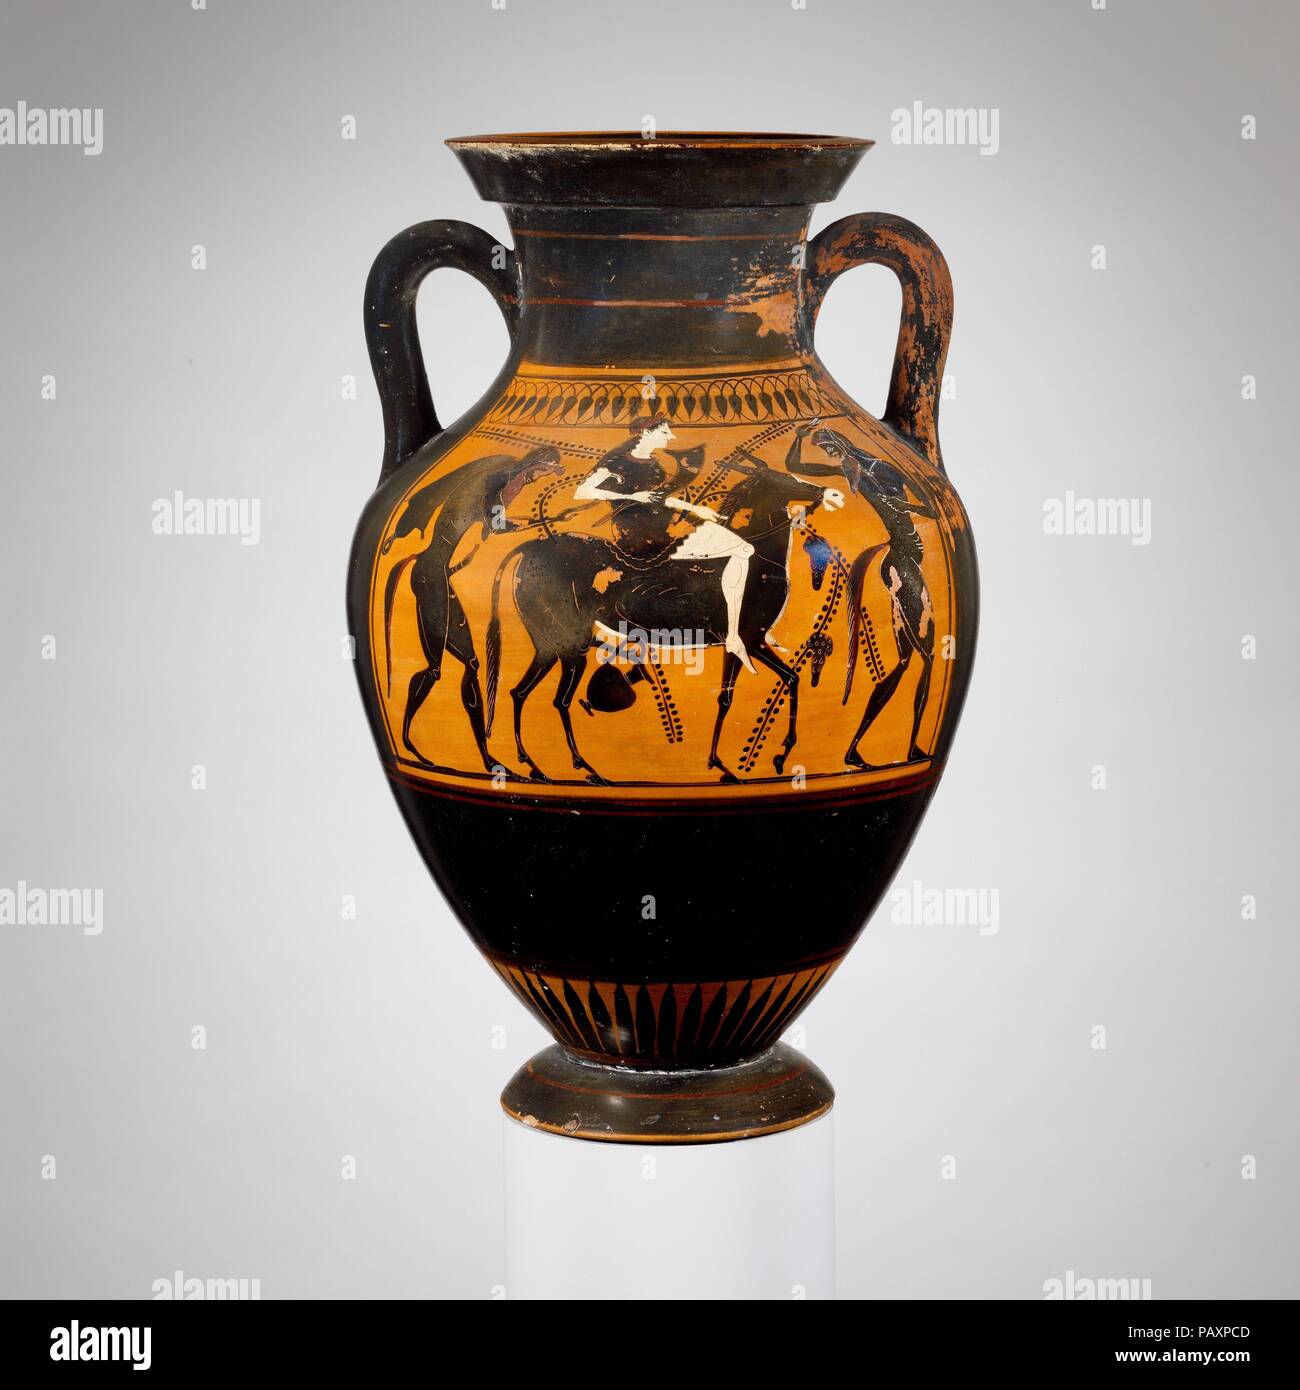 Terracotta amphora (jar). Culture: Greek, Attic. Dimensions: H. 15 1/8 in. (38.4 cm). Date: last quarter of 6th century B.C..  Obverse, banquet scene  Reverse, maenad riding a mule between two satyrs  Although the subject of each side of the amphora is different, the men and women, the satyrs and maenad, and the mule all are under the same influence. Museum: Metropolitan Museum of Art, New York, USA. Stock Photo